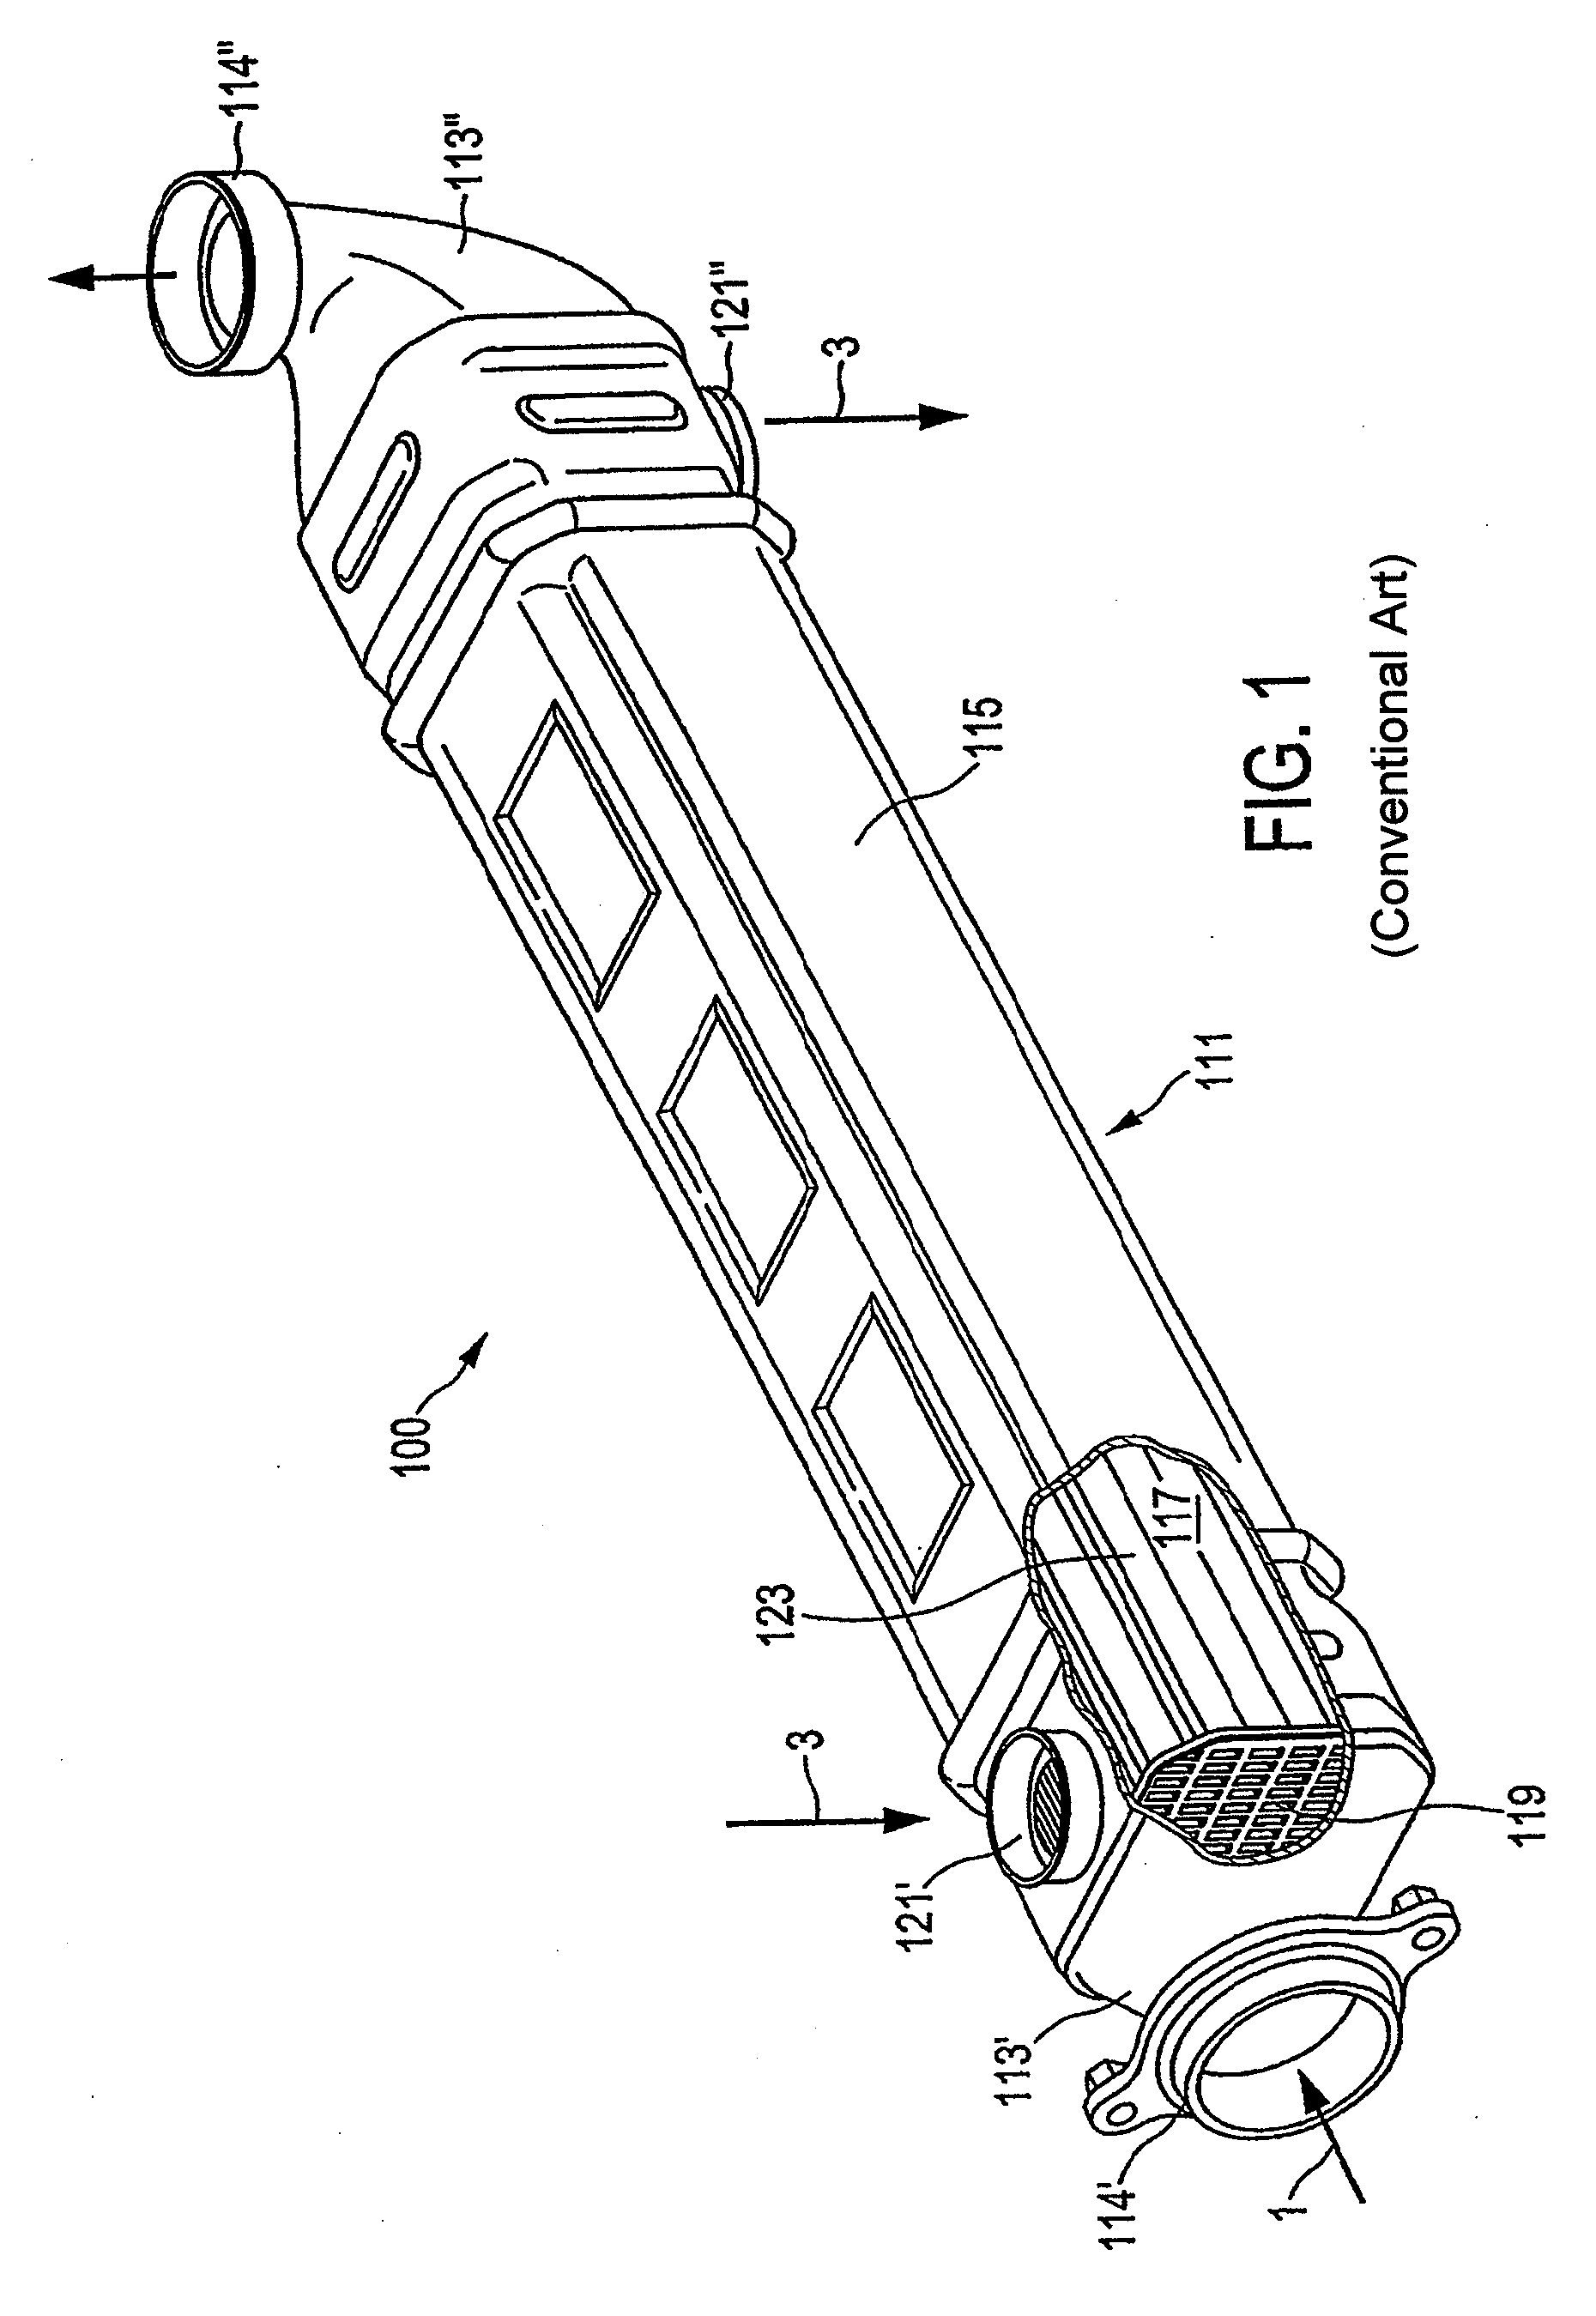 Heat exchanger, exhaust gas recirculation system, charge air supply system, and use of the heat exchanger